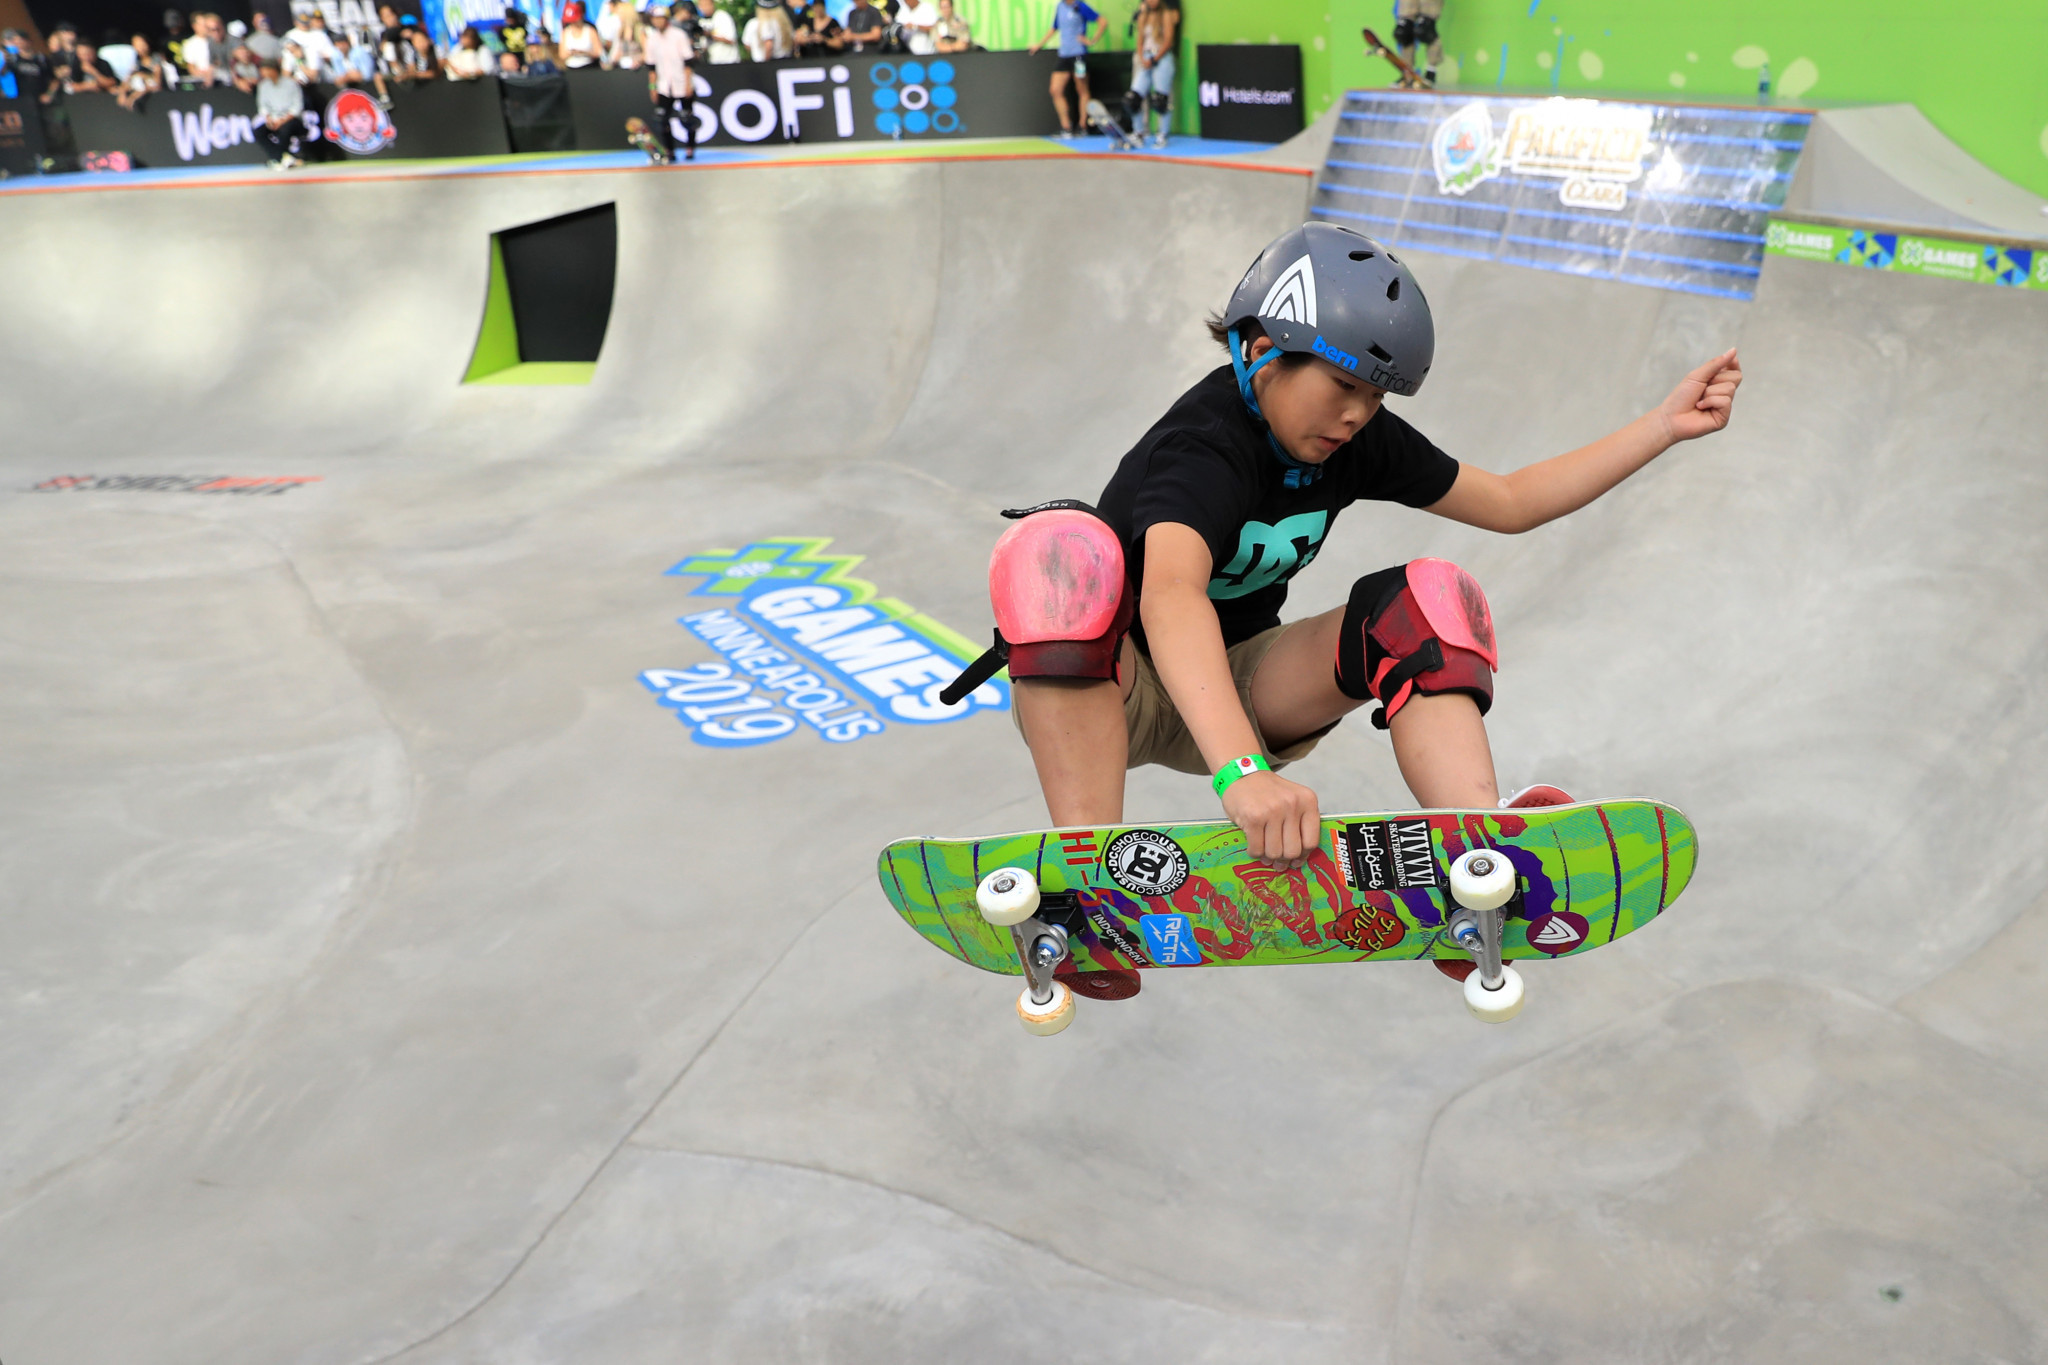 Misugu Okamoto showed once again why she is a name to keep an eye on ahead of next summer's Olympic Games, as the 13-year-old skateboarder won gold at the 2019 Summer X Games ©Getty Images